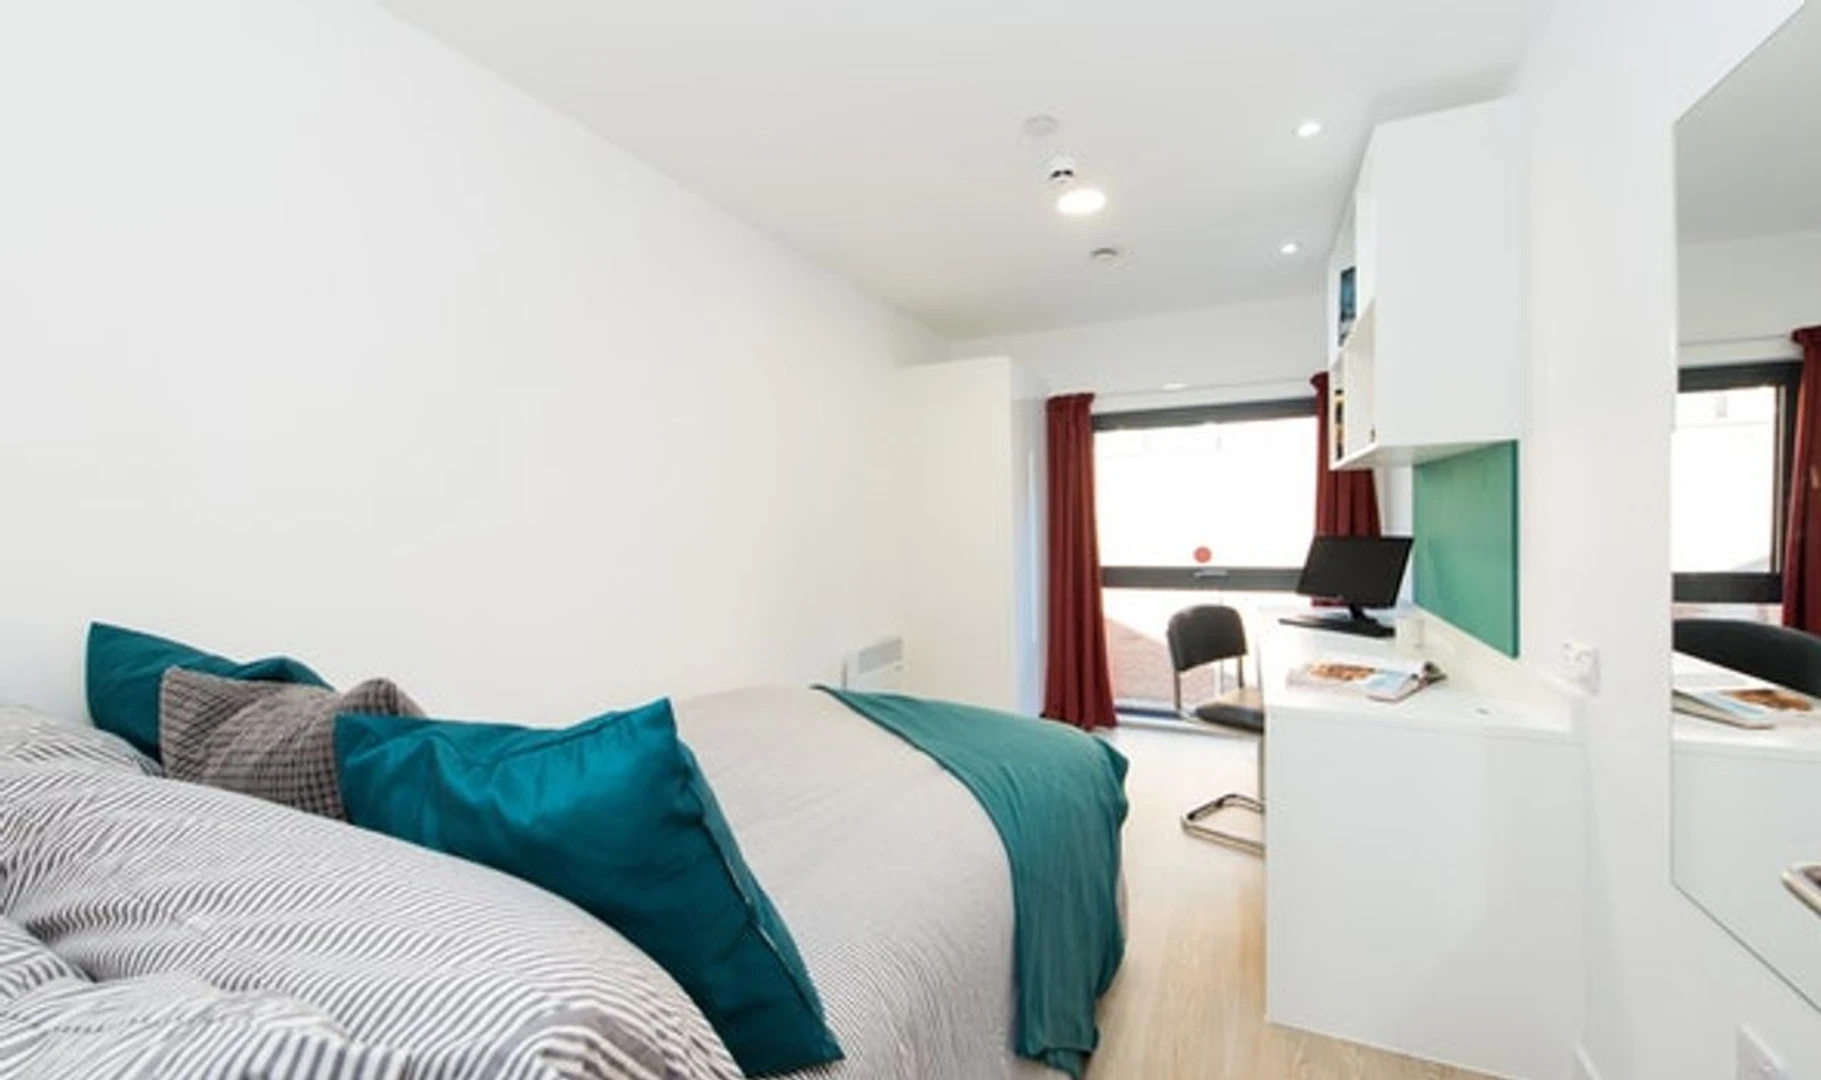 Renting rooms by the month in southampton